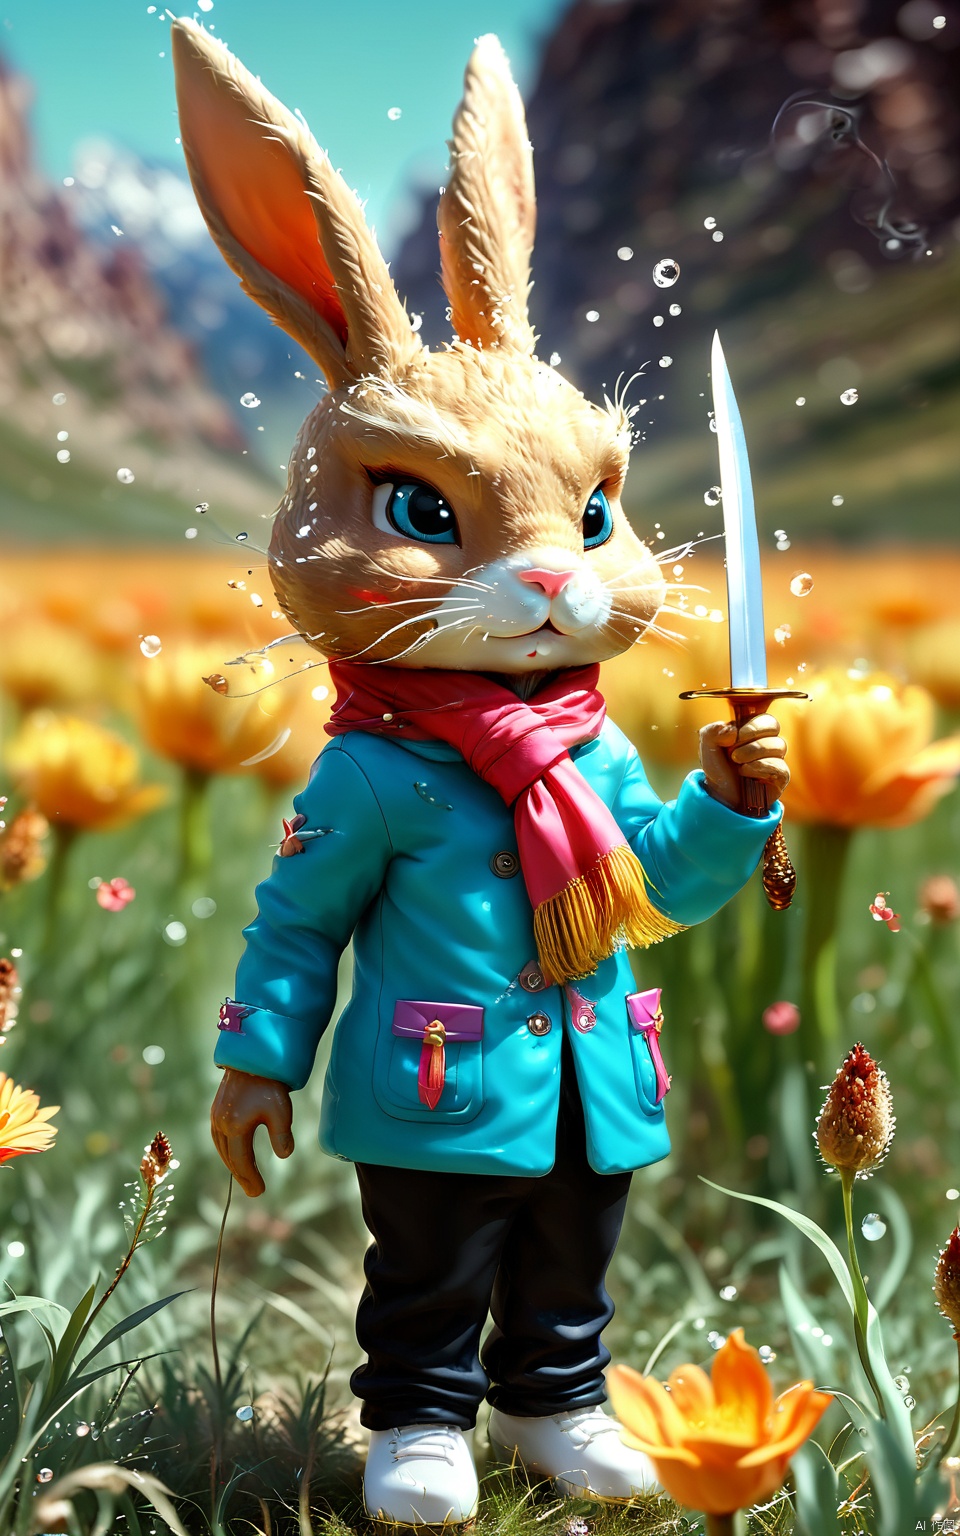 "Sword Spirit", 3D, magic realism, shallow depth of field, environment occlusion, rabbit character, listening to music, grass field, ice blue jacket, black pants, colorful scarf, colorful hat, one foot lifted with the music, frontal angle, healing breeze, golden glow, huayu,flower, JMLong, particles